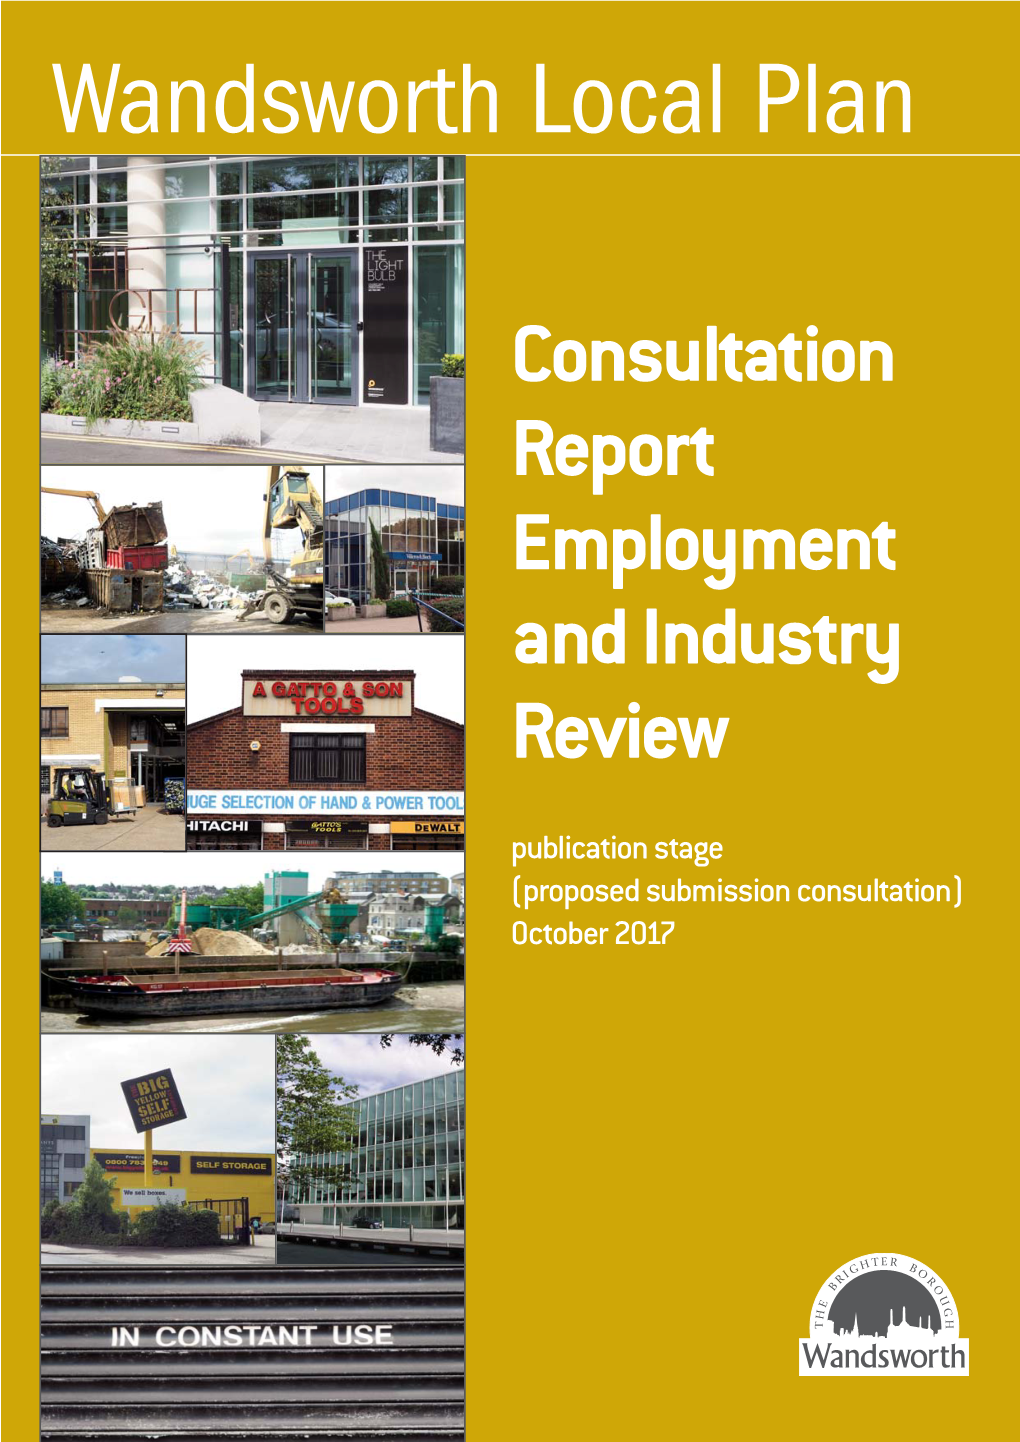 Wandsworth Local Plan: Consultation Report Employment and Industry Review - Publication Stage (Proposed Submission Consultation) October 2017